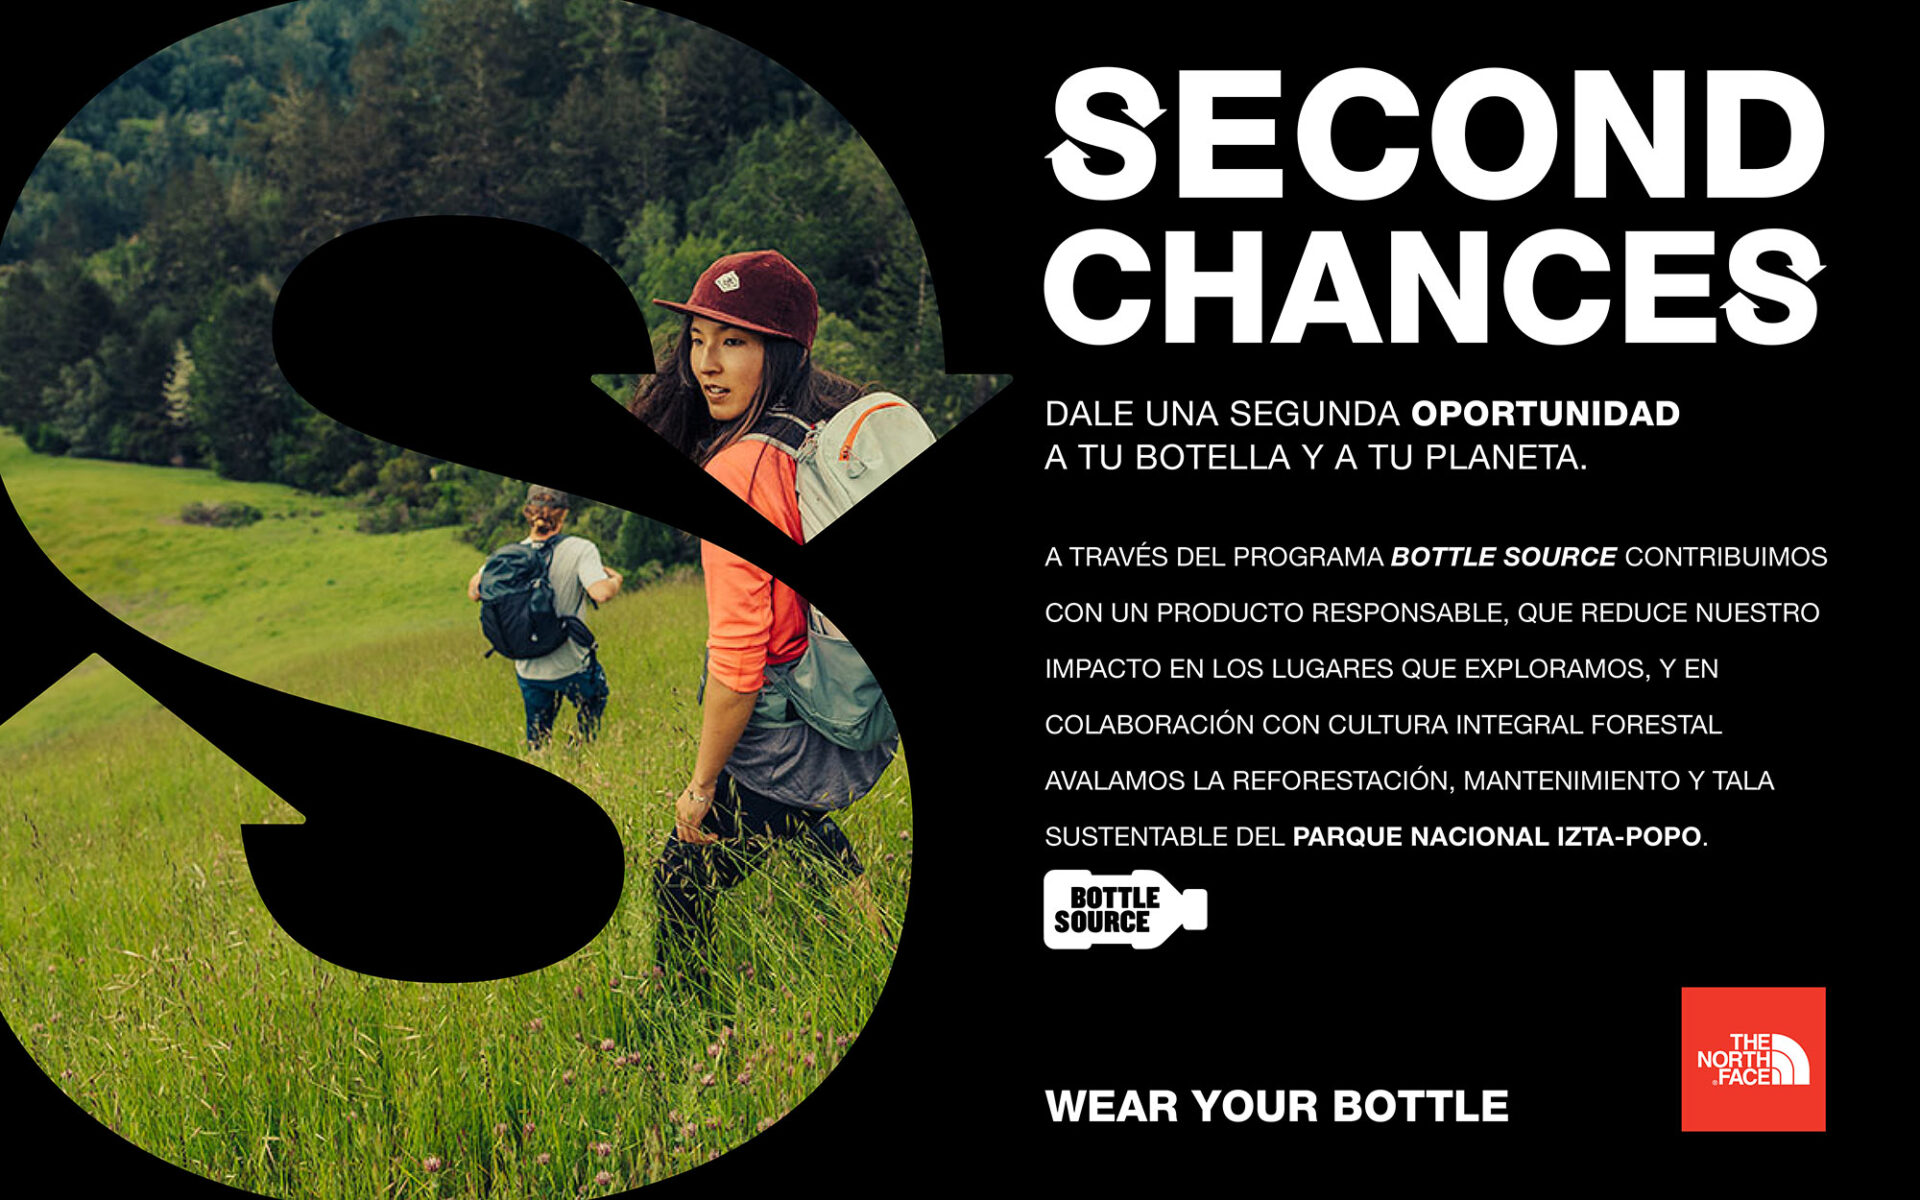 The North Face Bottle Source